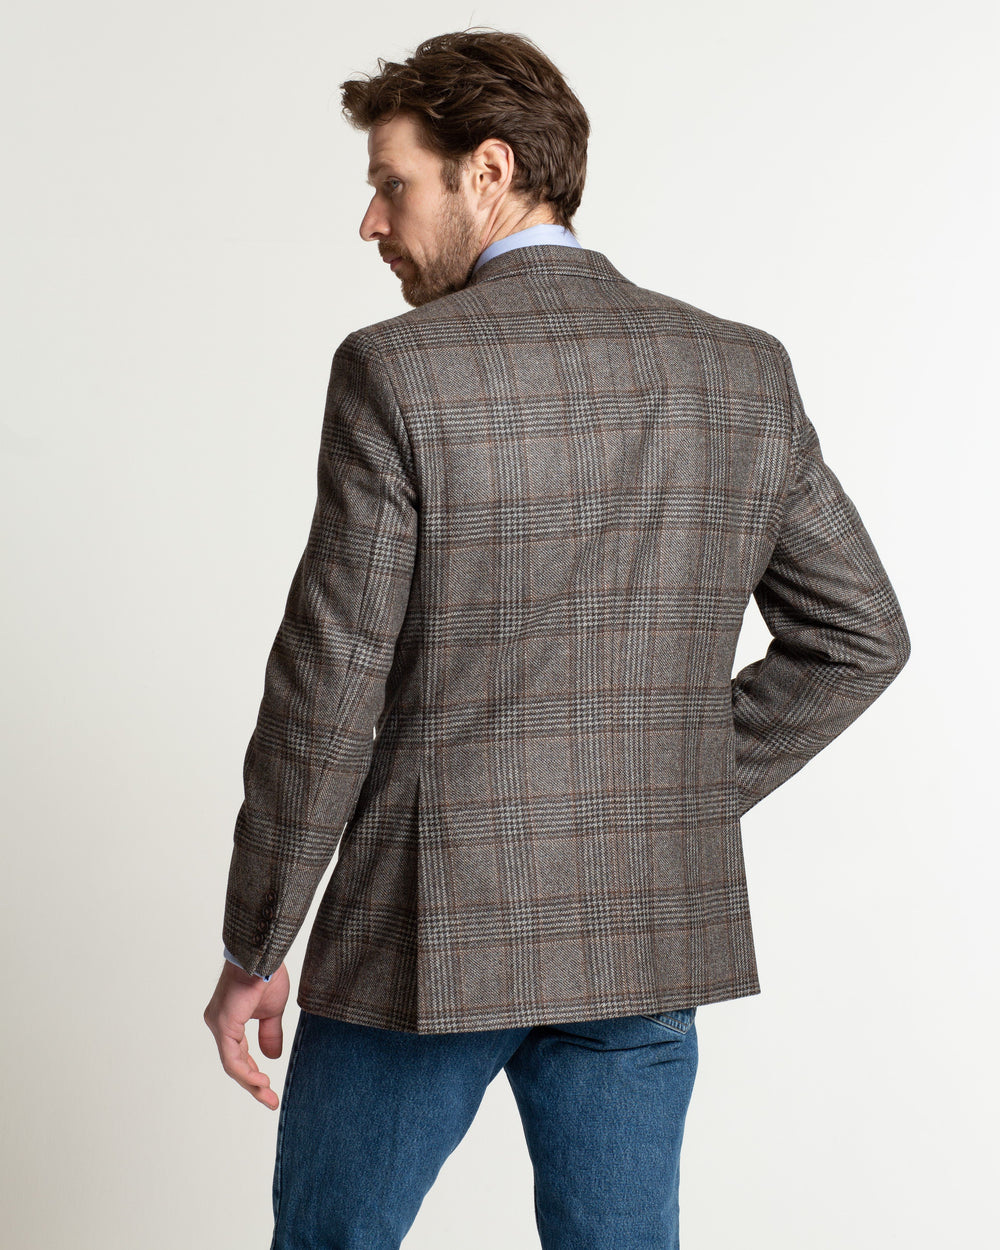 Toby Luper Signature Collection Brown & Grey Glen Check UK